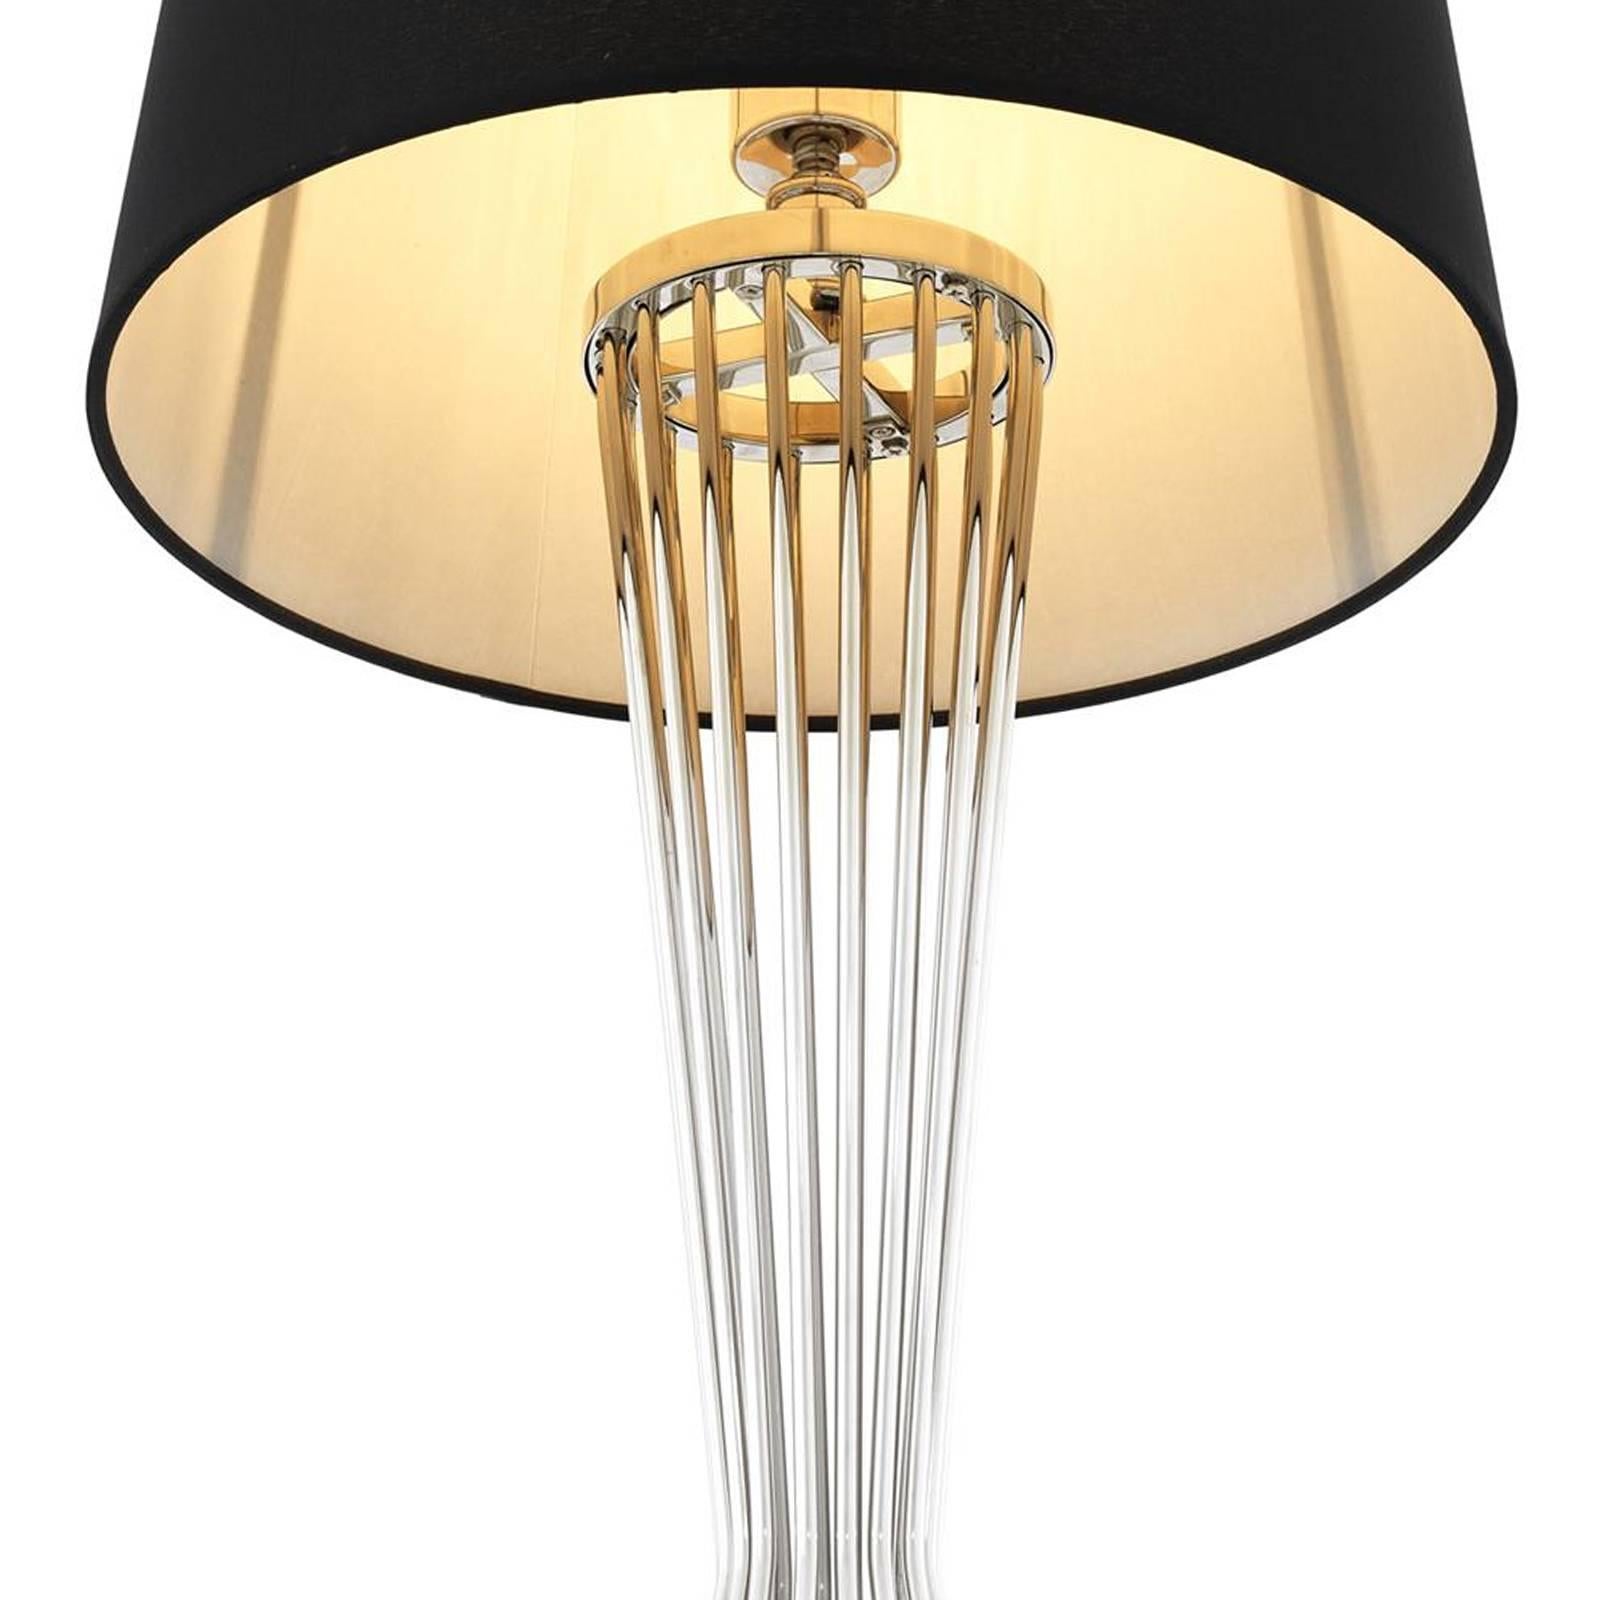 Barnet Table Lamp in Gold or Nickel Finish 3